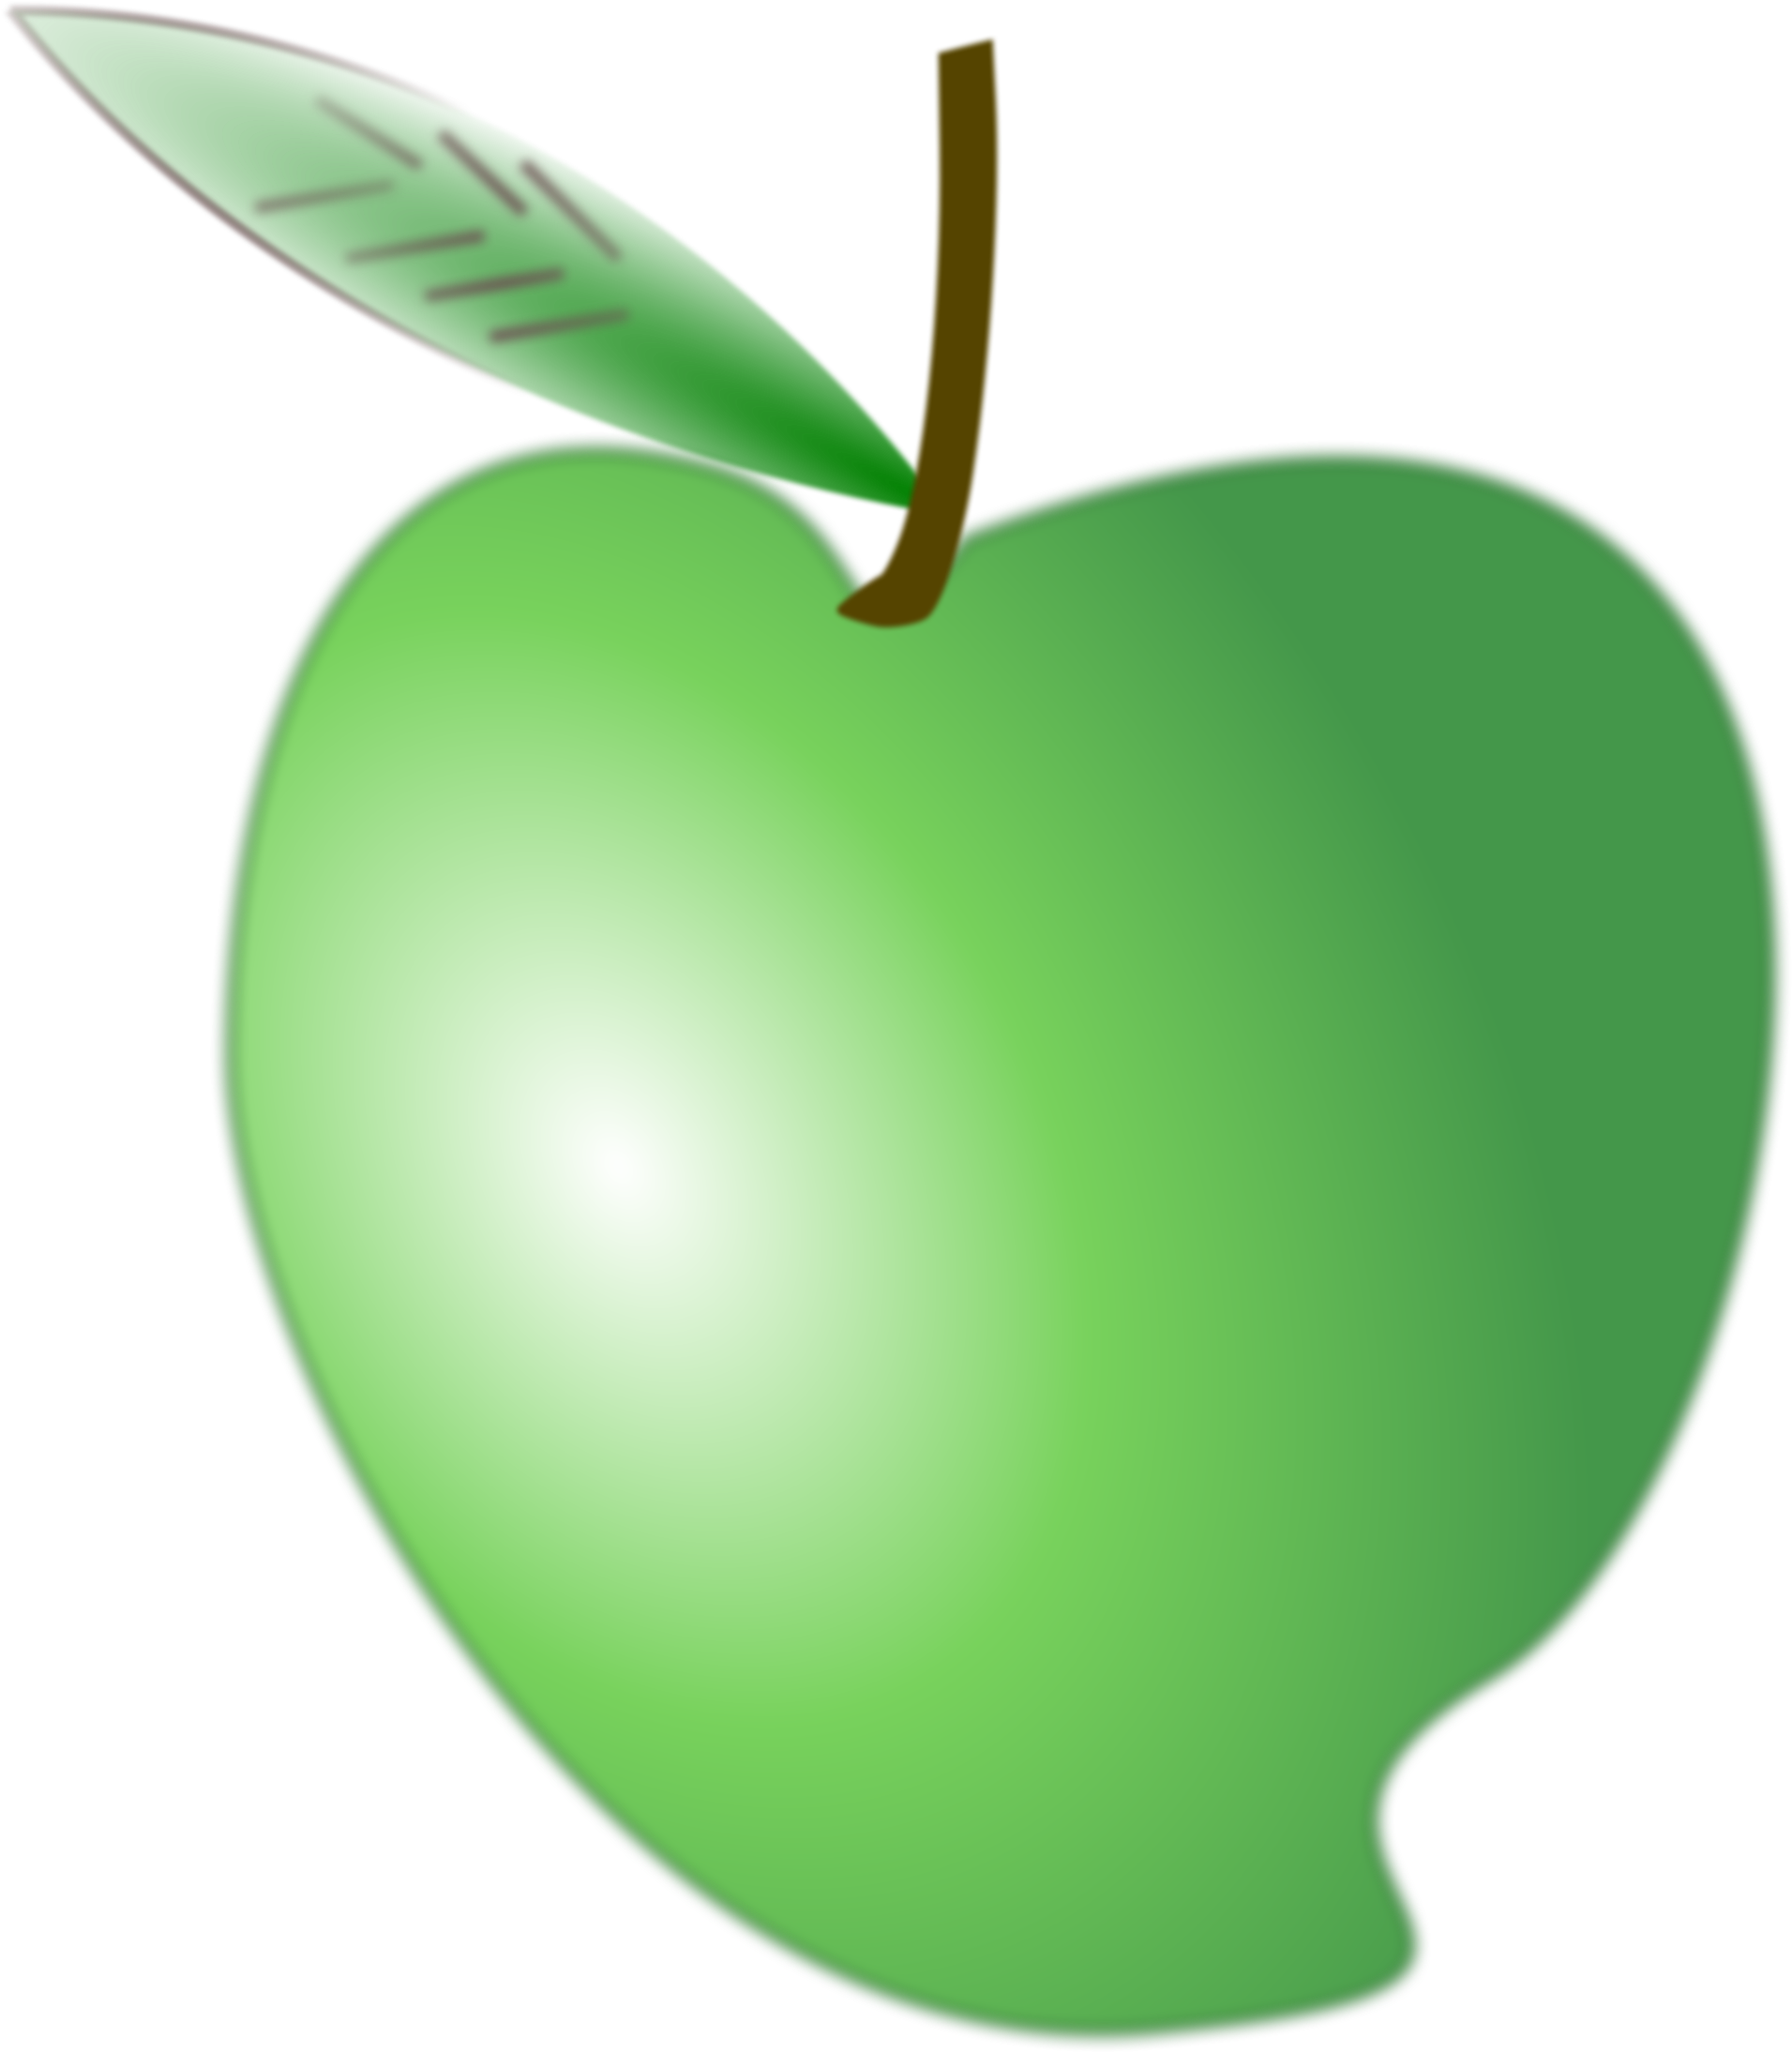 A Green Apple With A Leaf